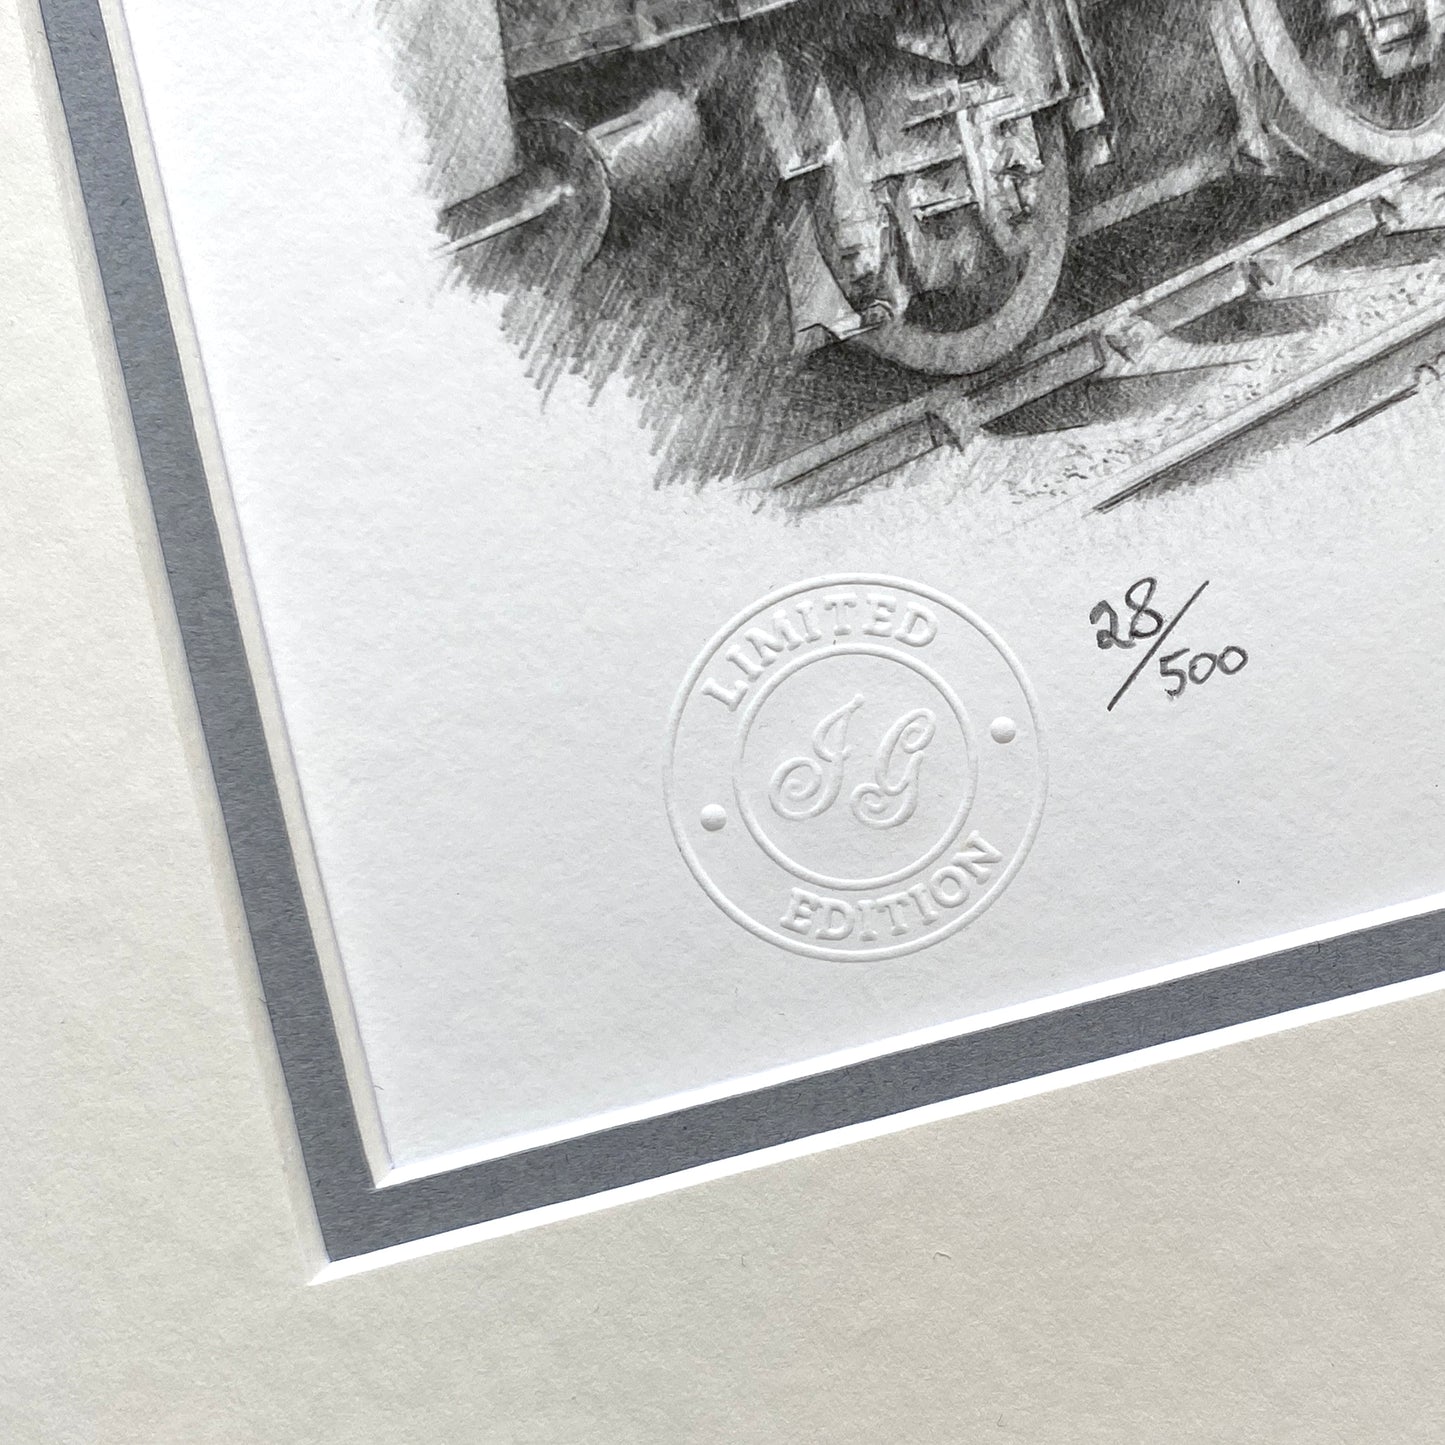 GWR Class 4300 Limited Edition Print